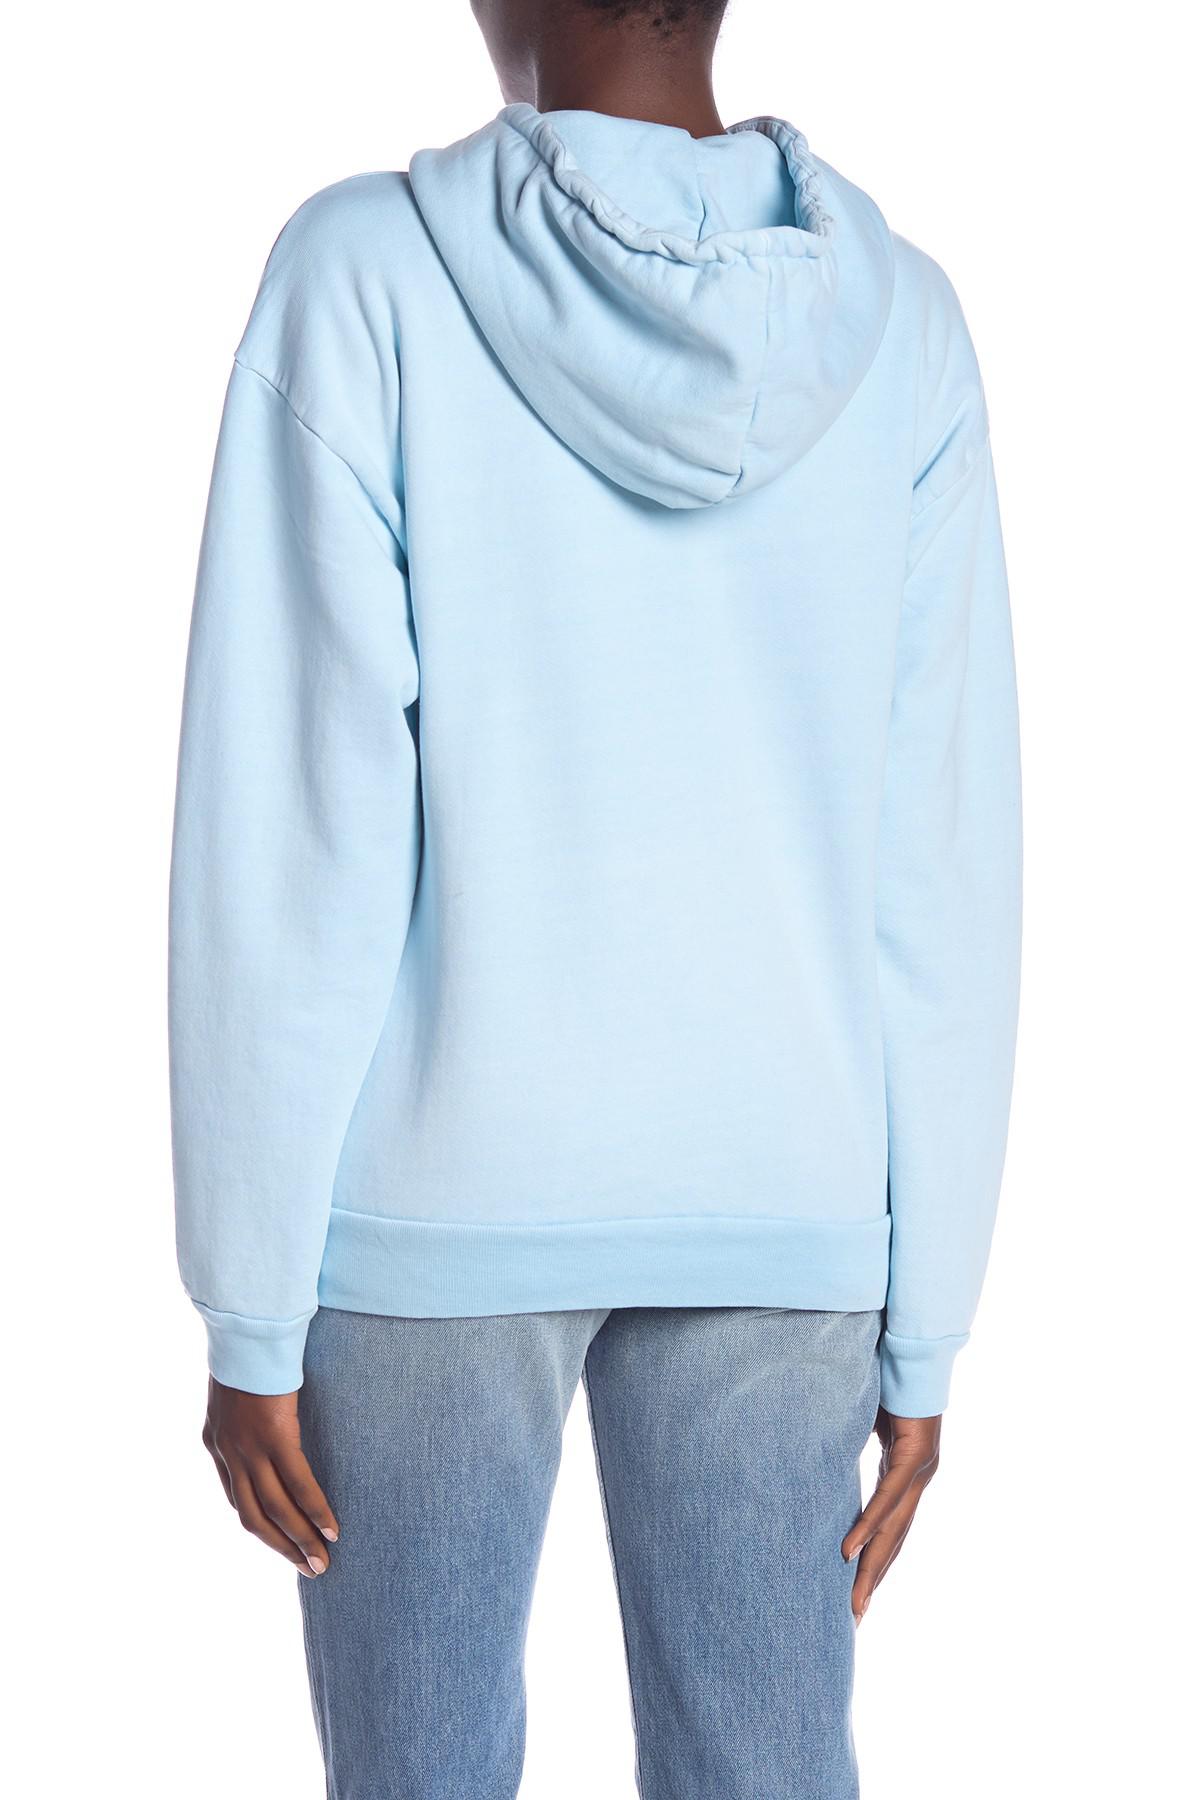 FRAME Cotton Oversized Hoodie in Faded Light Blue (Blue) - Lyst